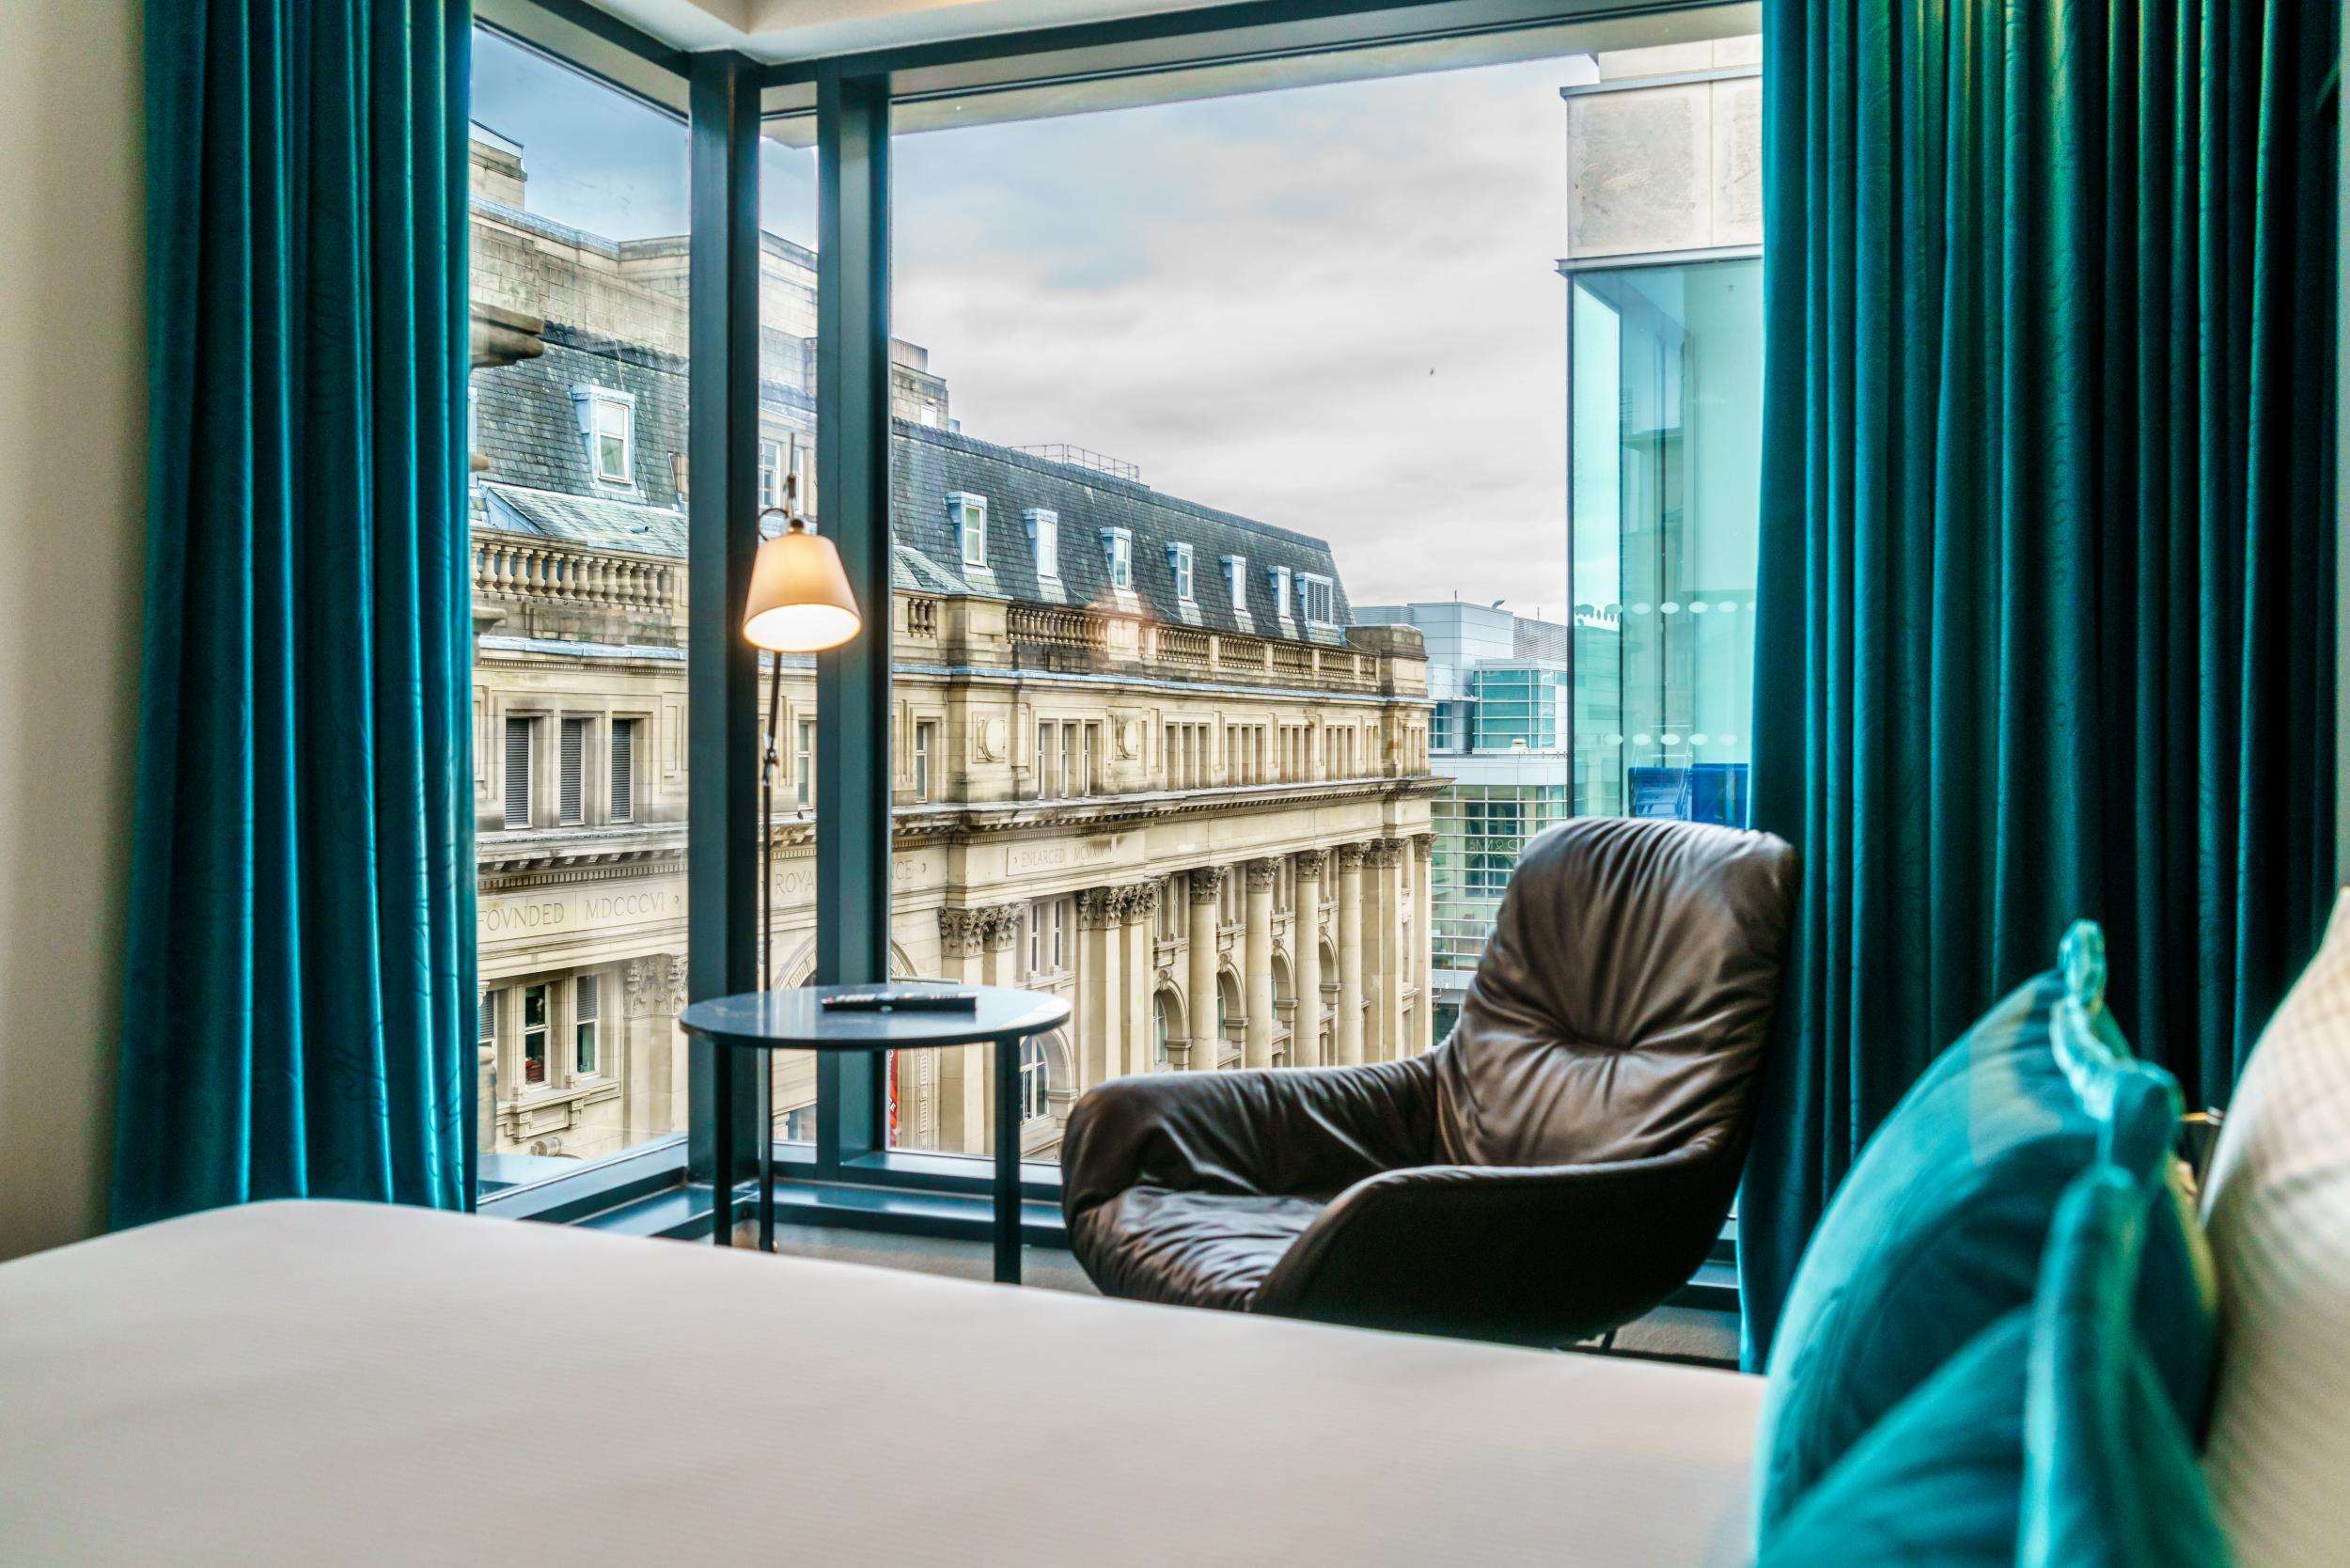 Motel One is situated in the heart of the city's shopping district, making this an ideal spot for some retail therapy